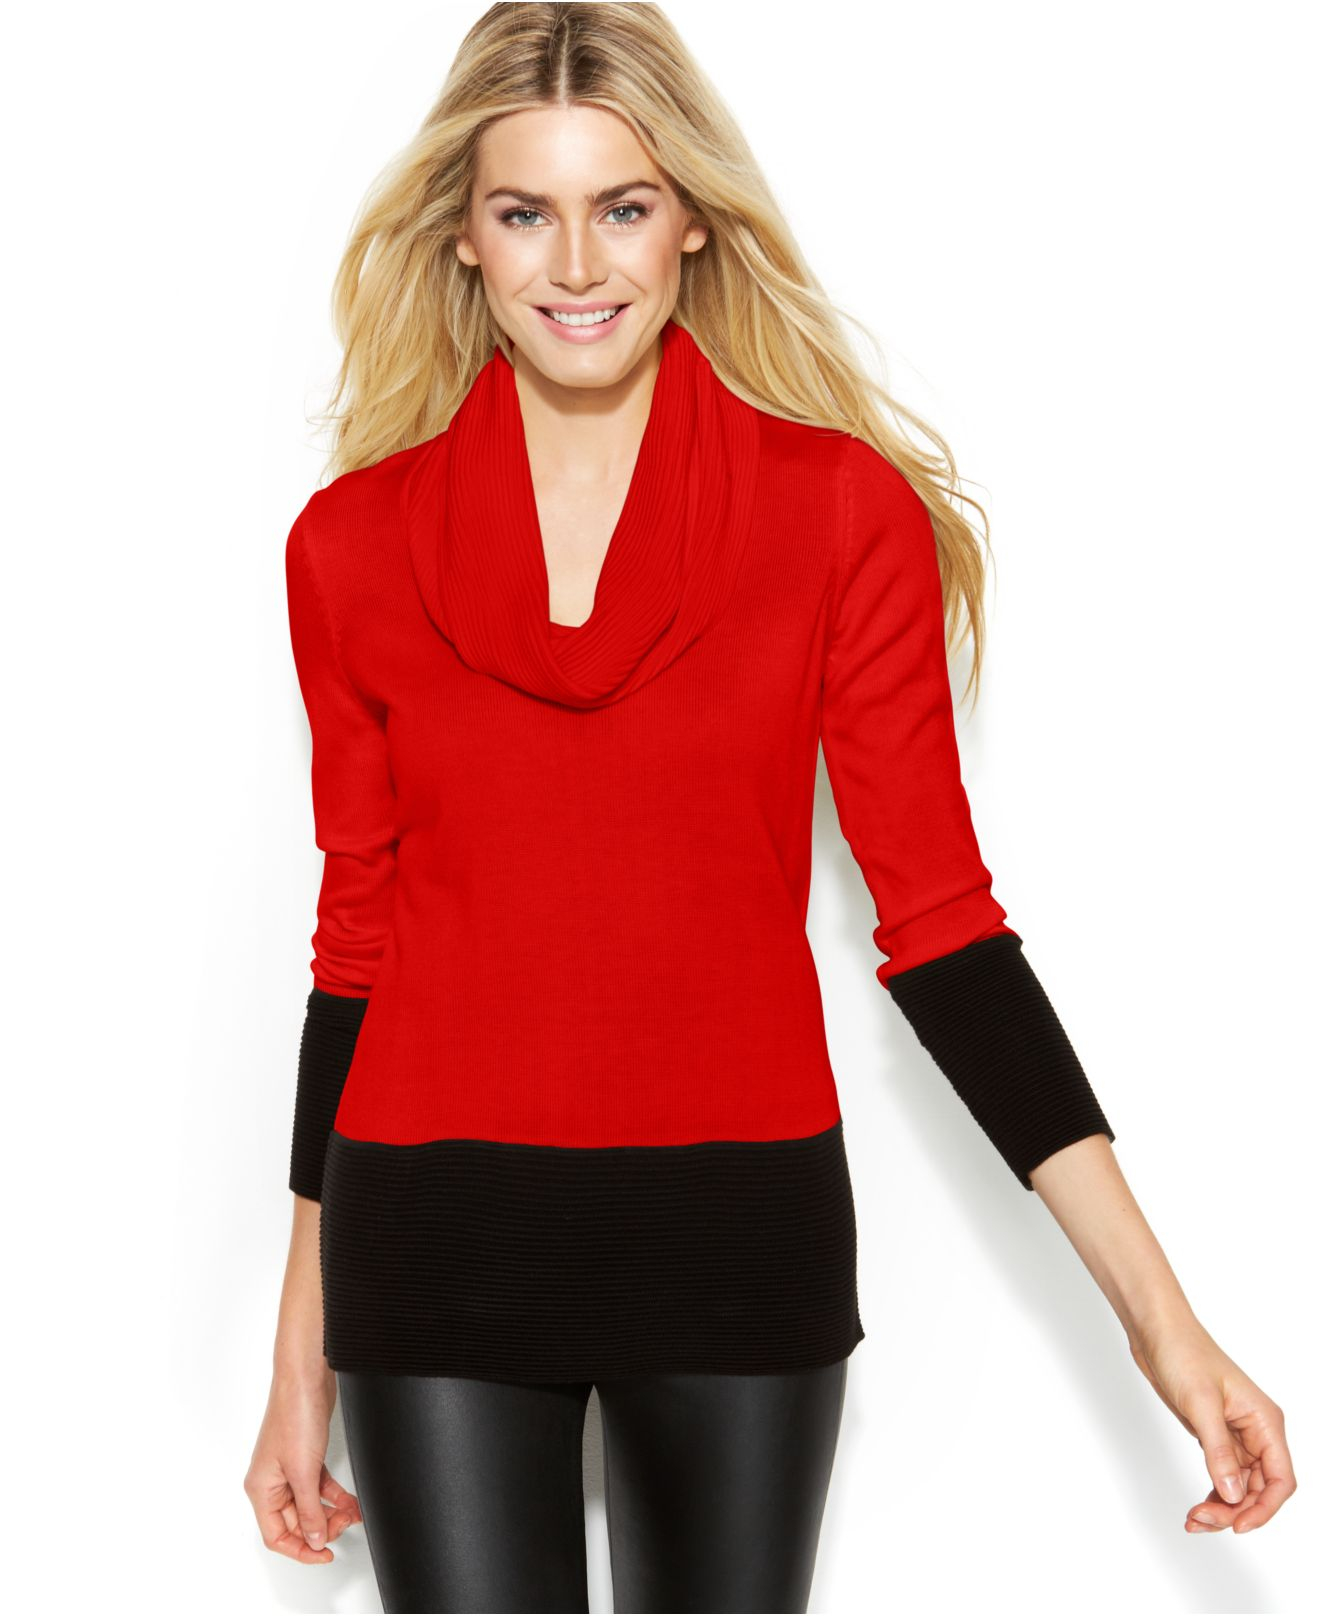 Lyst - Calvin Klein Colorblock Cowl-Neck Sweater in Red